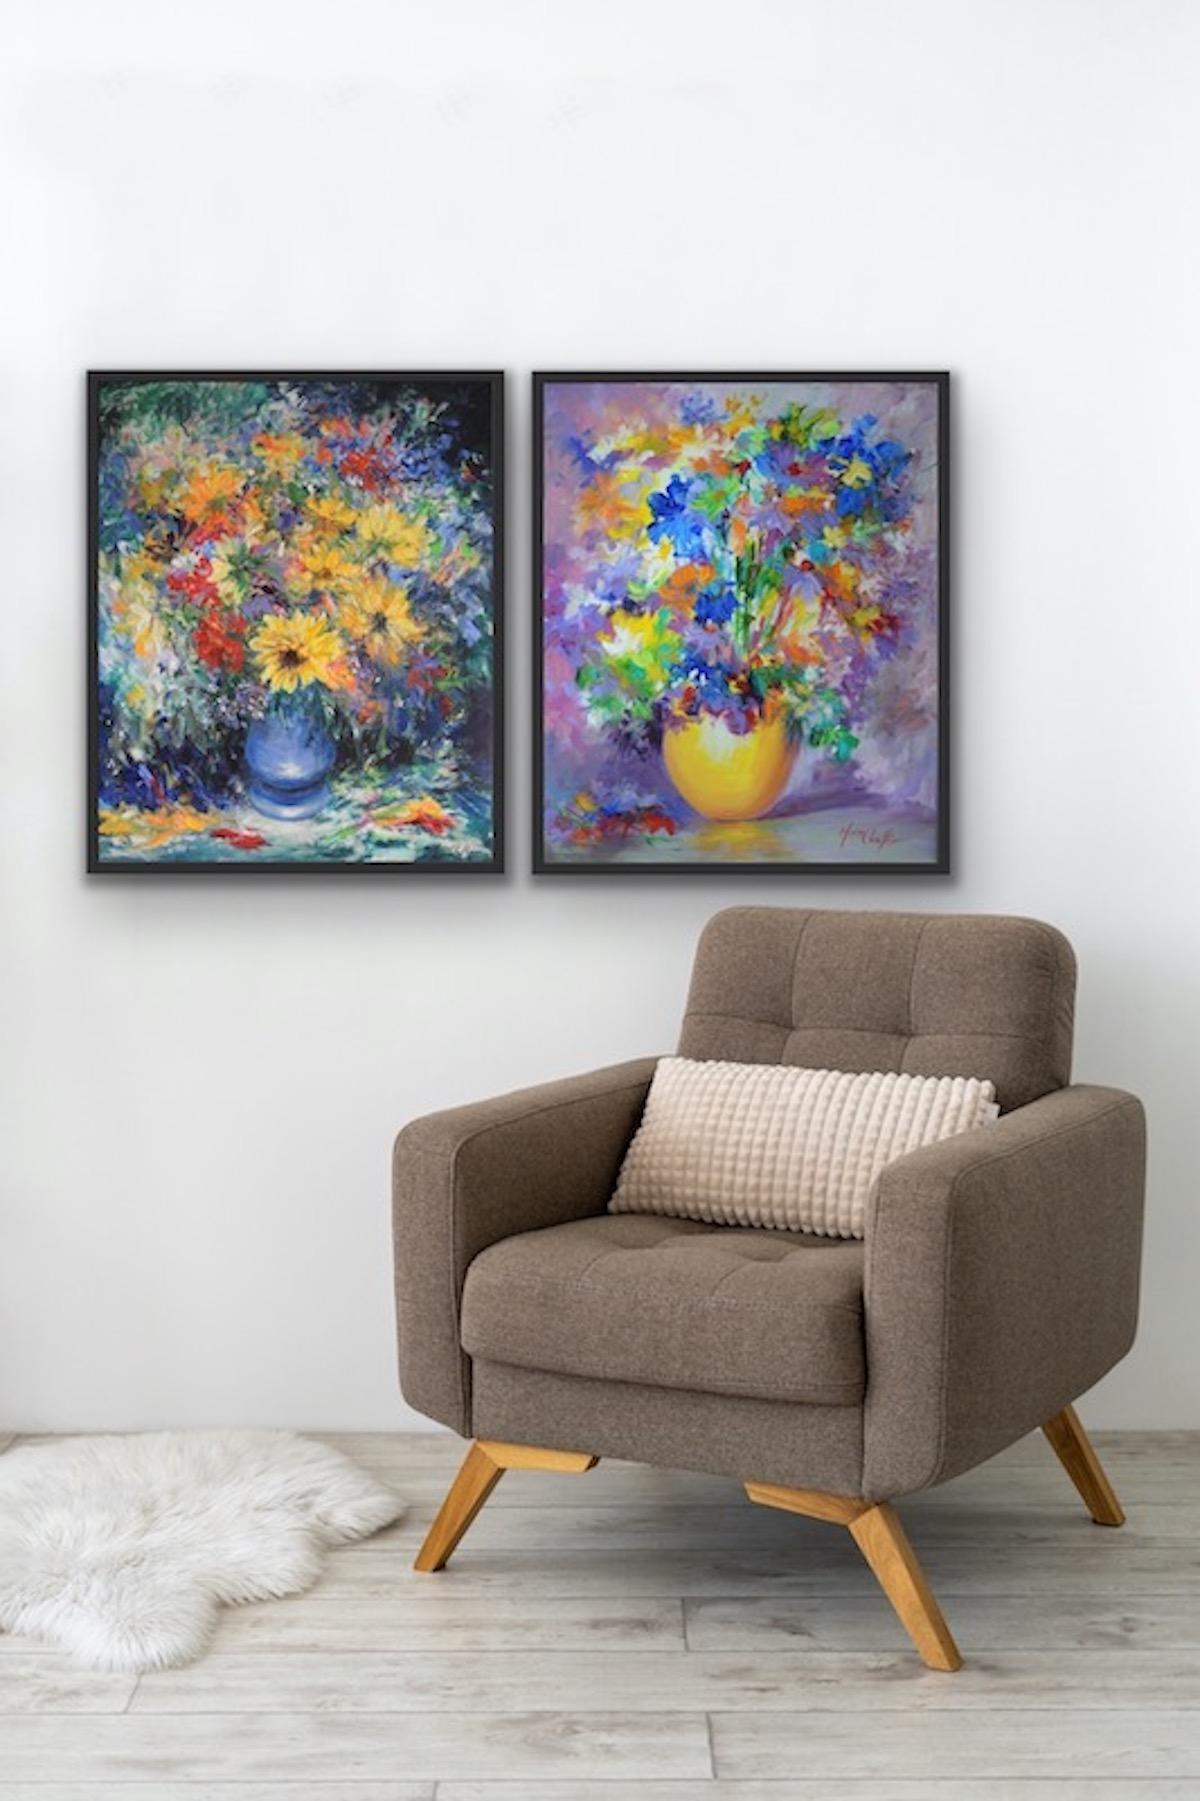 Autumn Glory and September Glory Diptych - Painting by Mary Chaplin